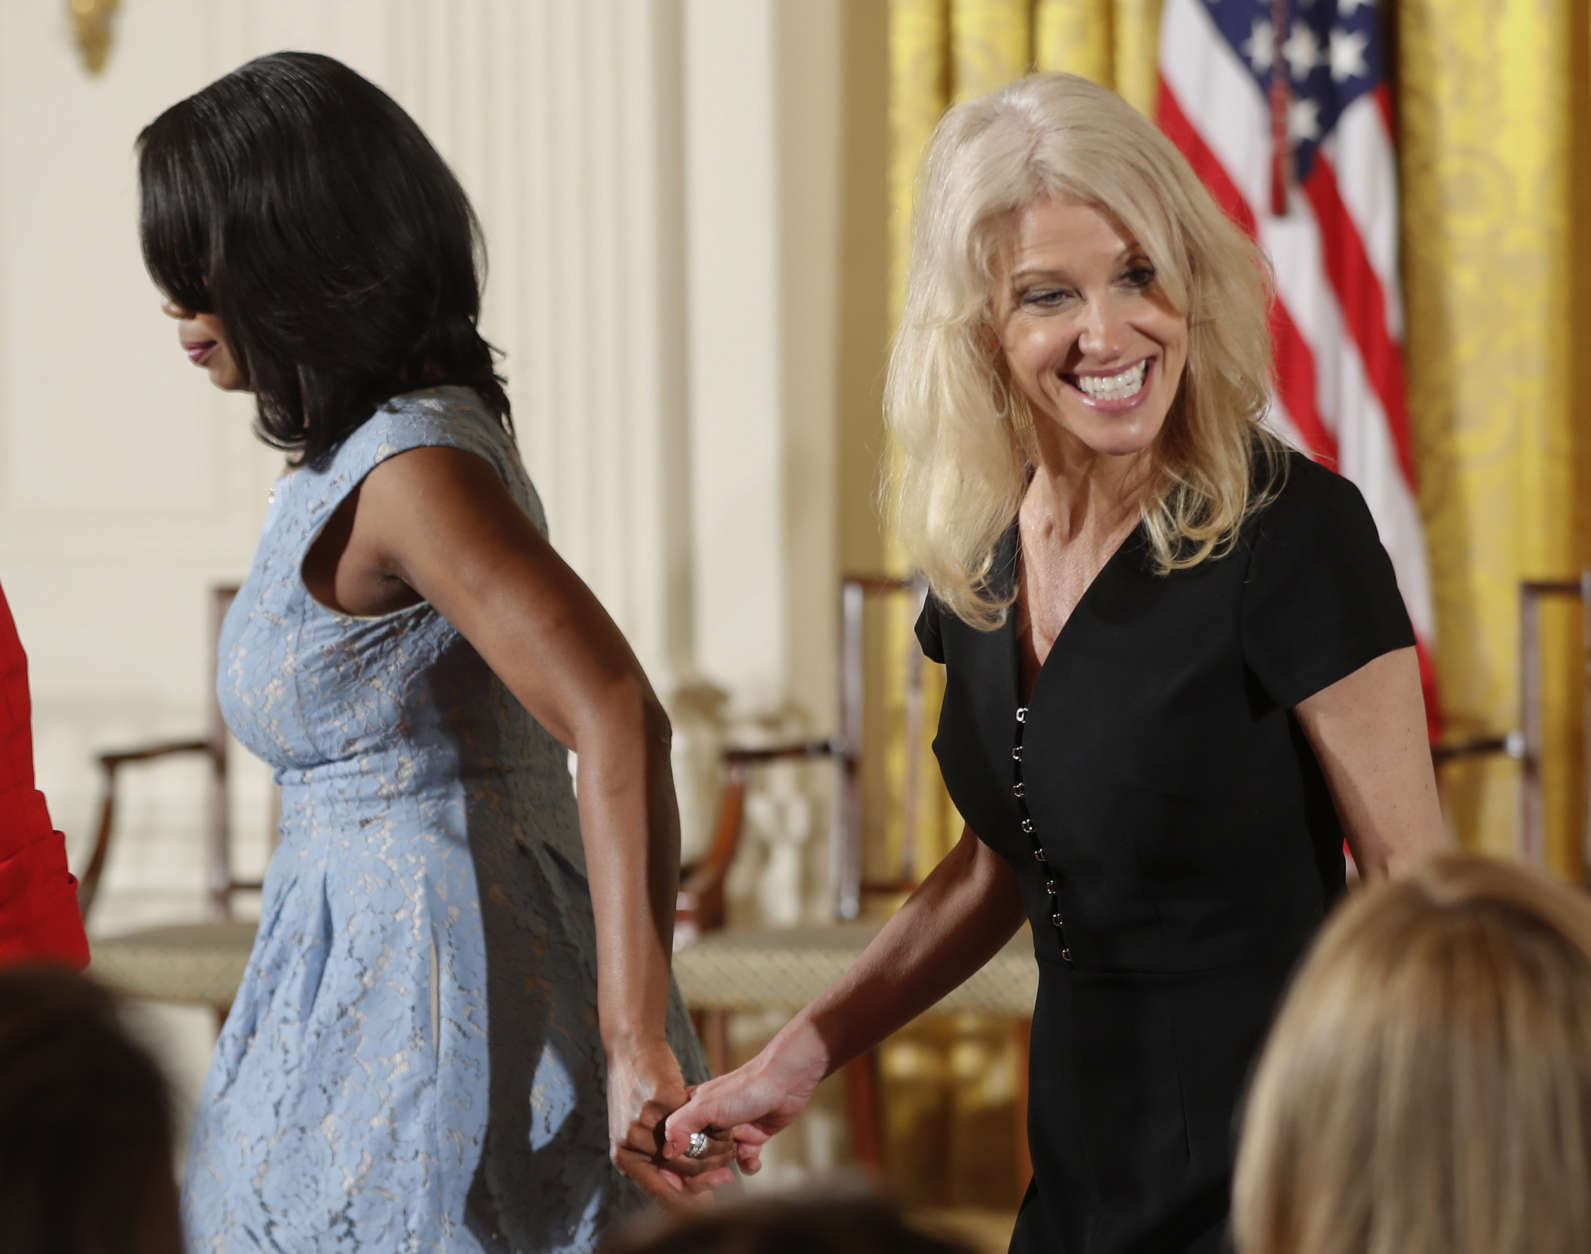 White House Director of communications for the Office of Public Liaison Omarosa Manigault, left, and Counselor to the President Kellyanne Conway, take their seats at the Women's Empowerment Panel, Wednesday, March 29, 2017, at the White House in Washington. (AP Photo/Pablo Martinez Monsivais)